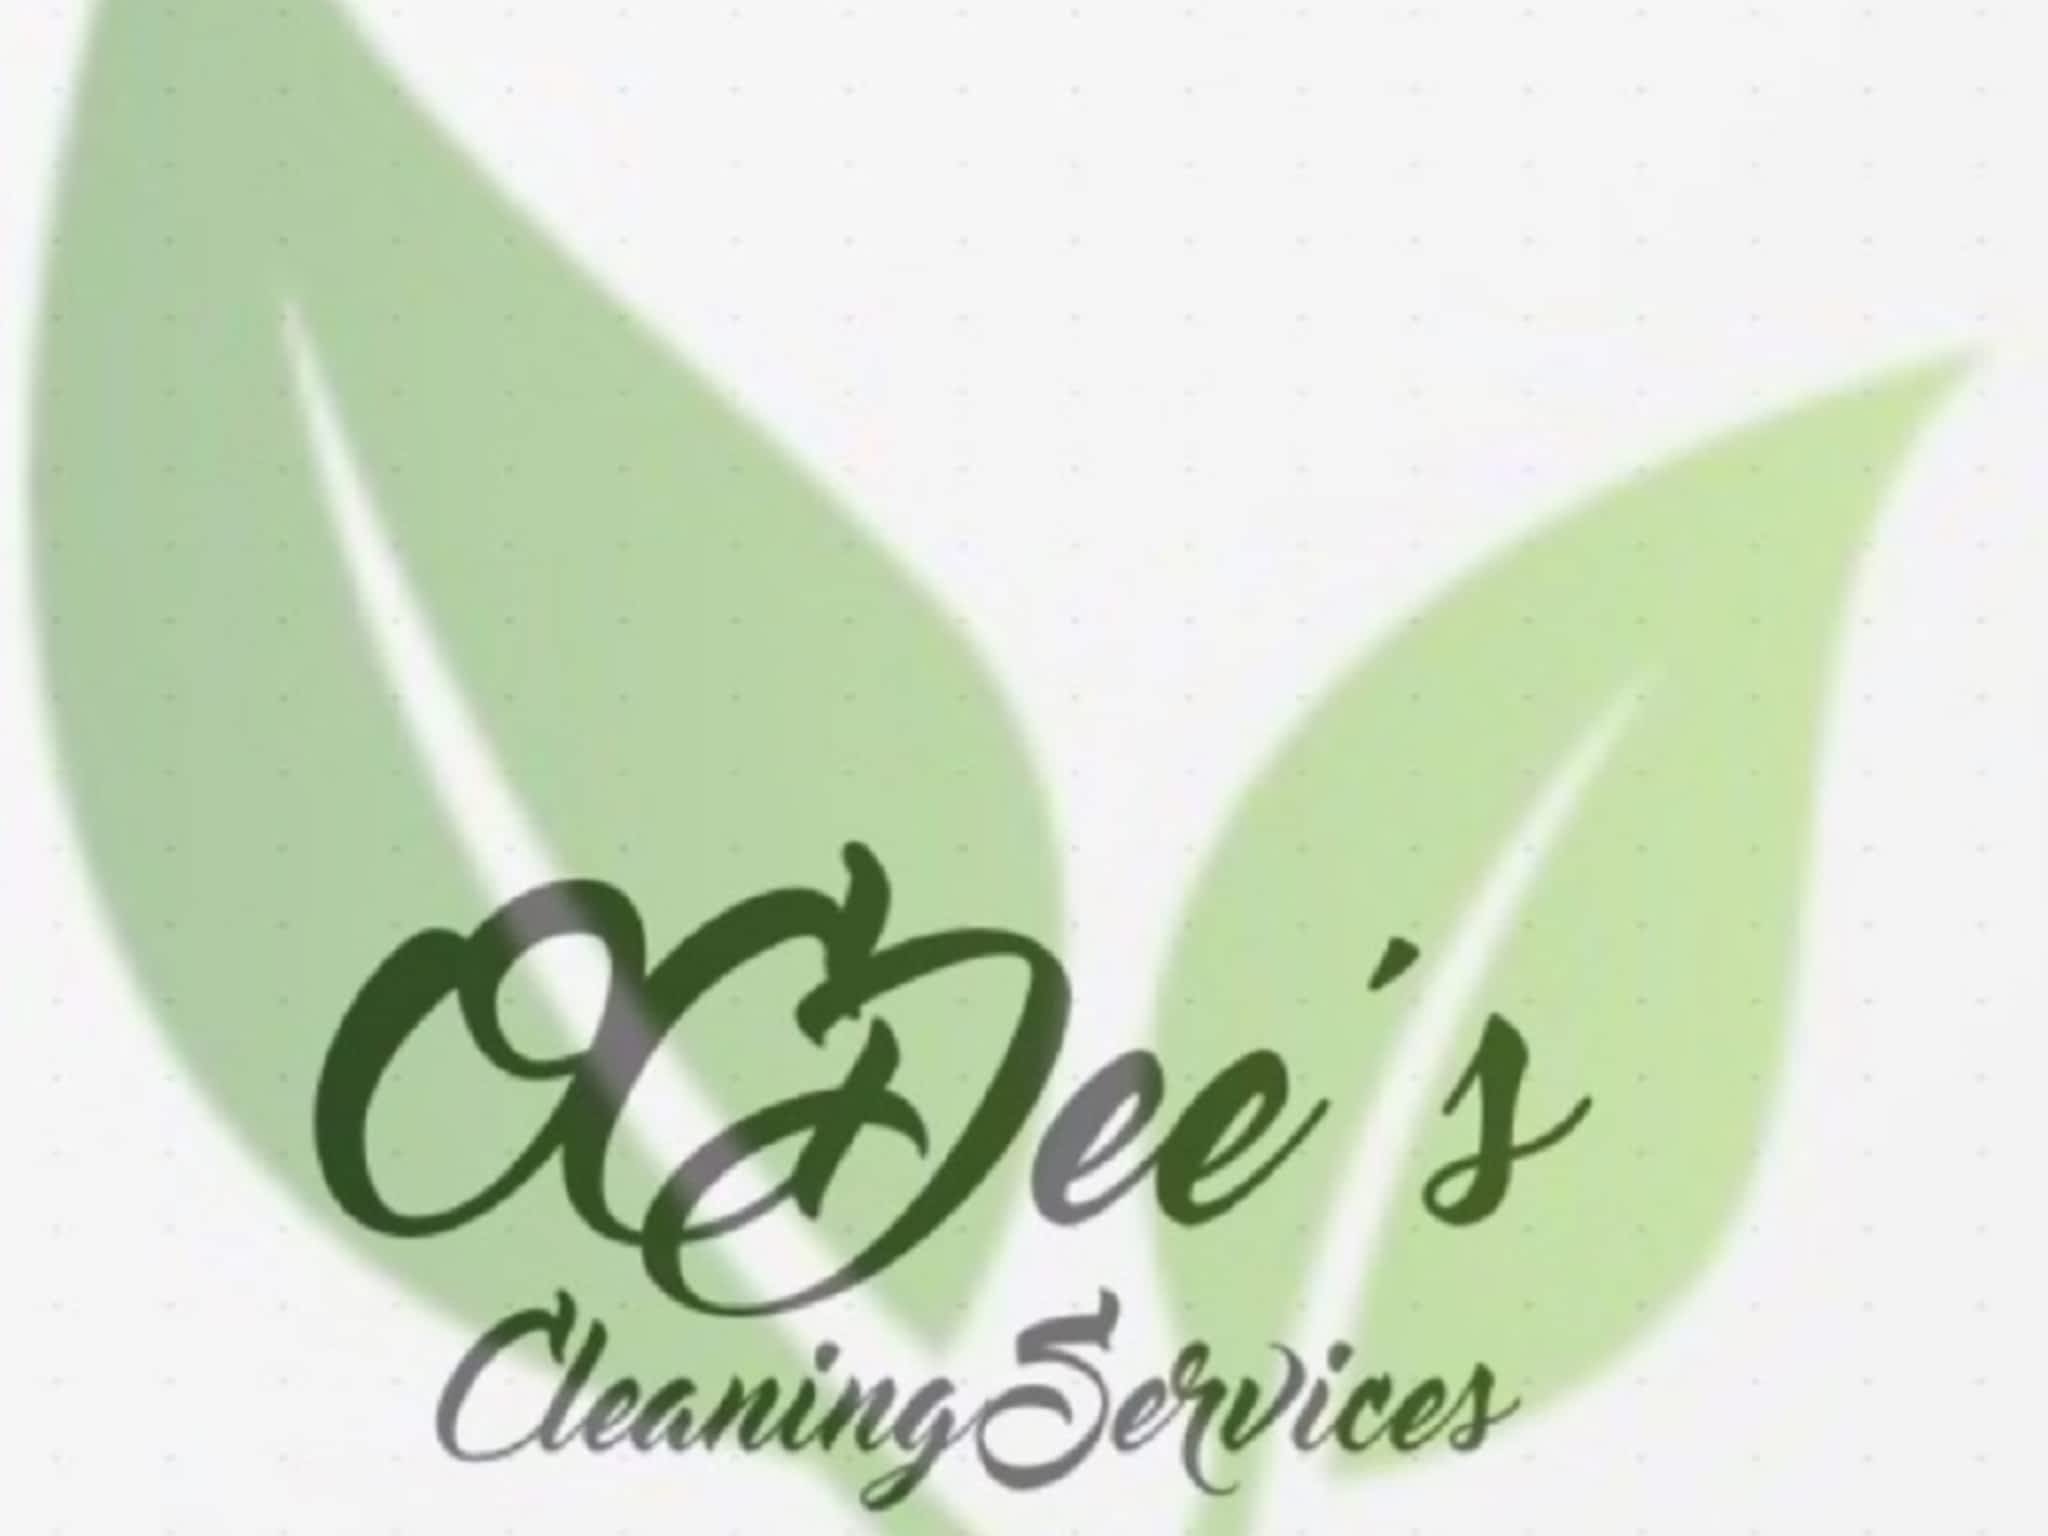 photo OCDee's Cleaning Services